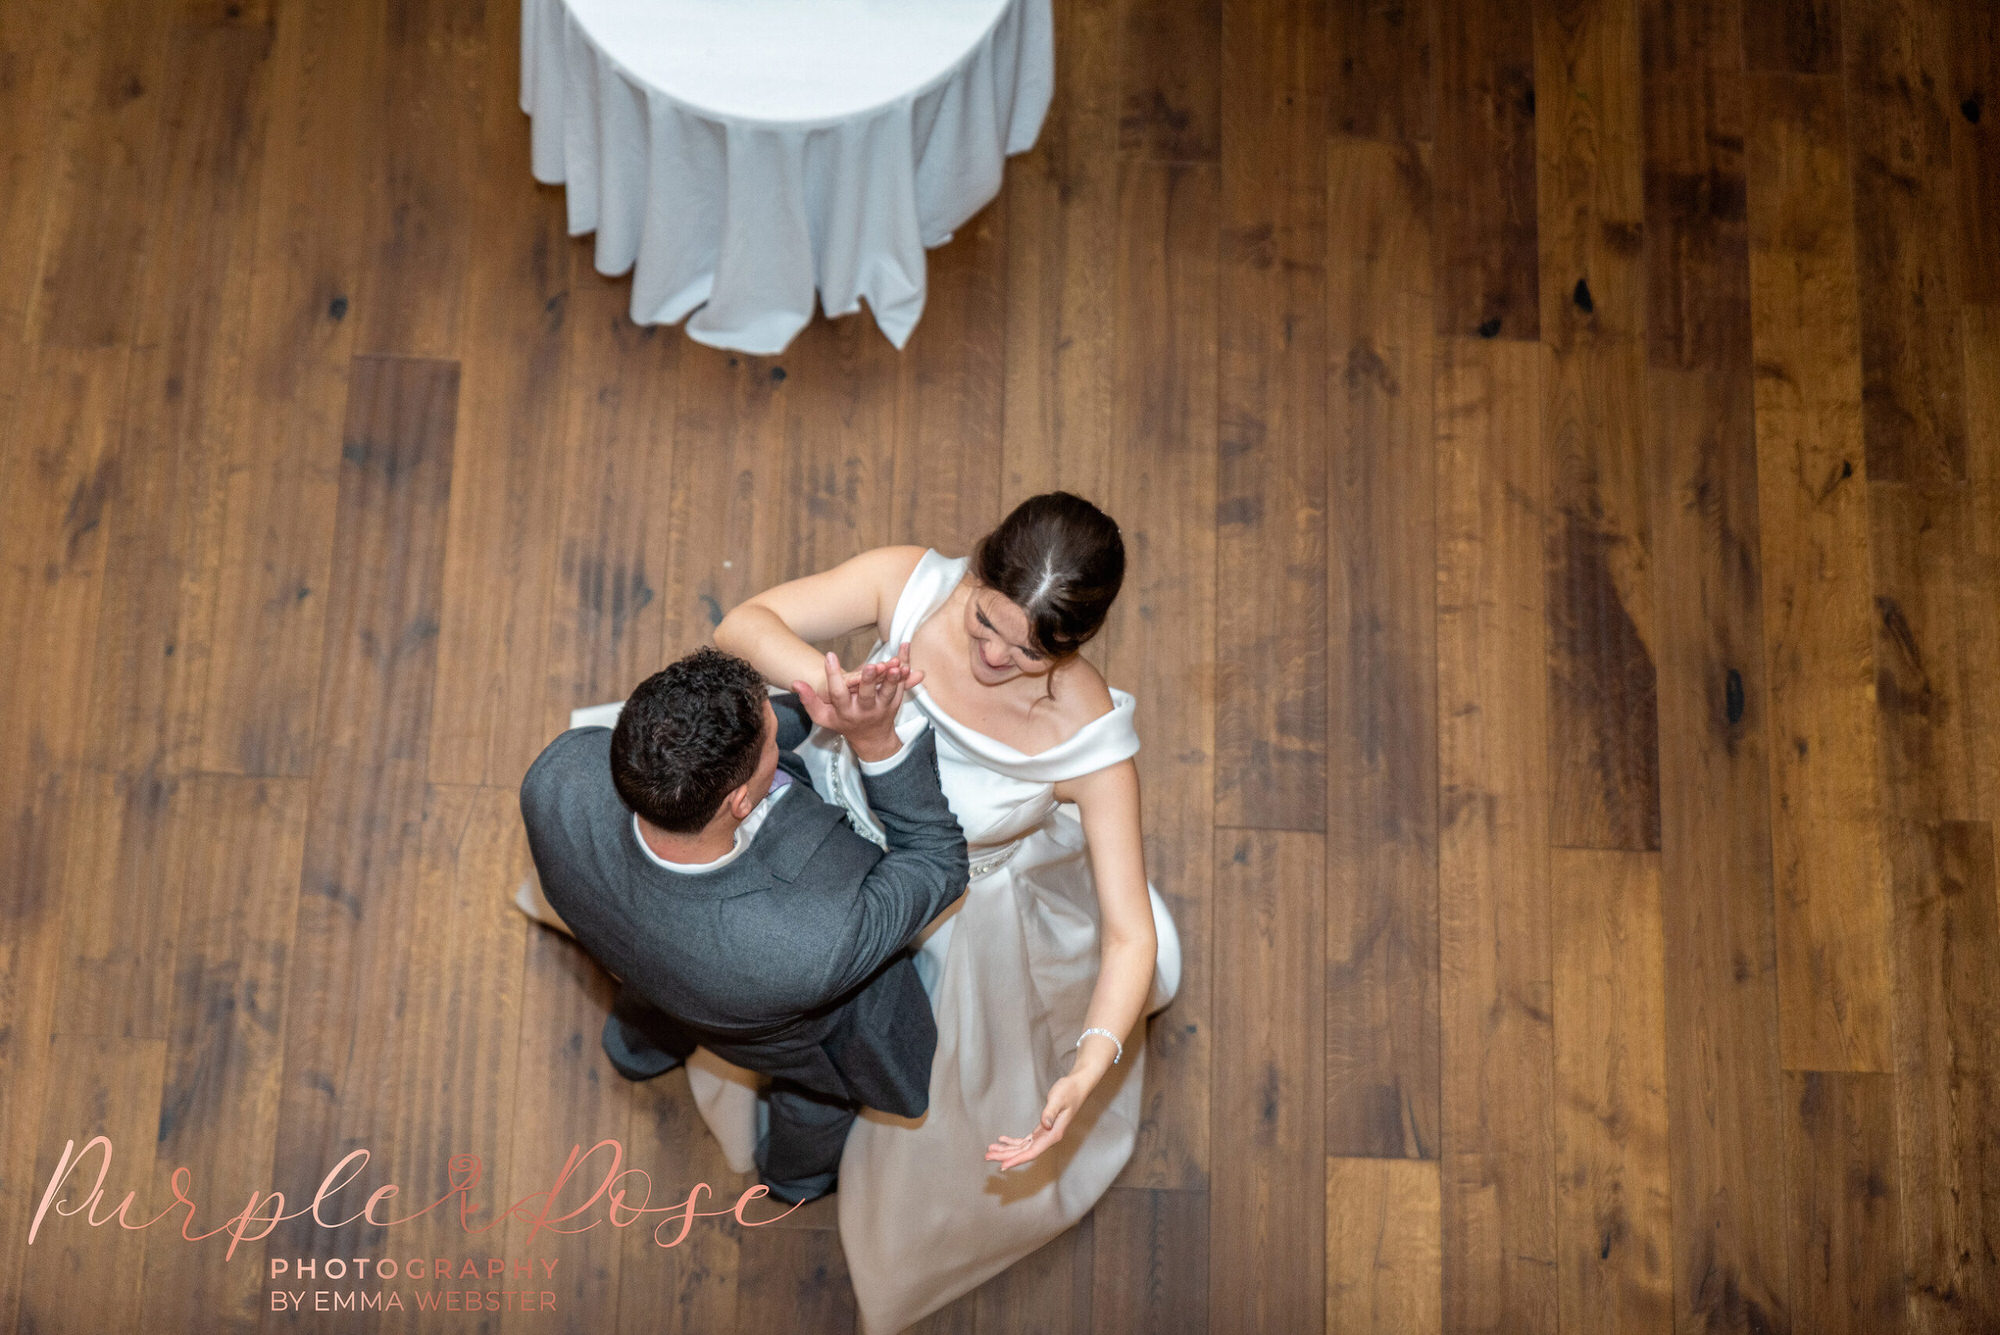 Aerial photo of a bride and groom dancing